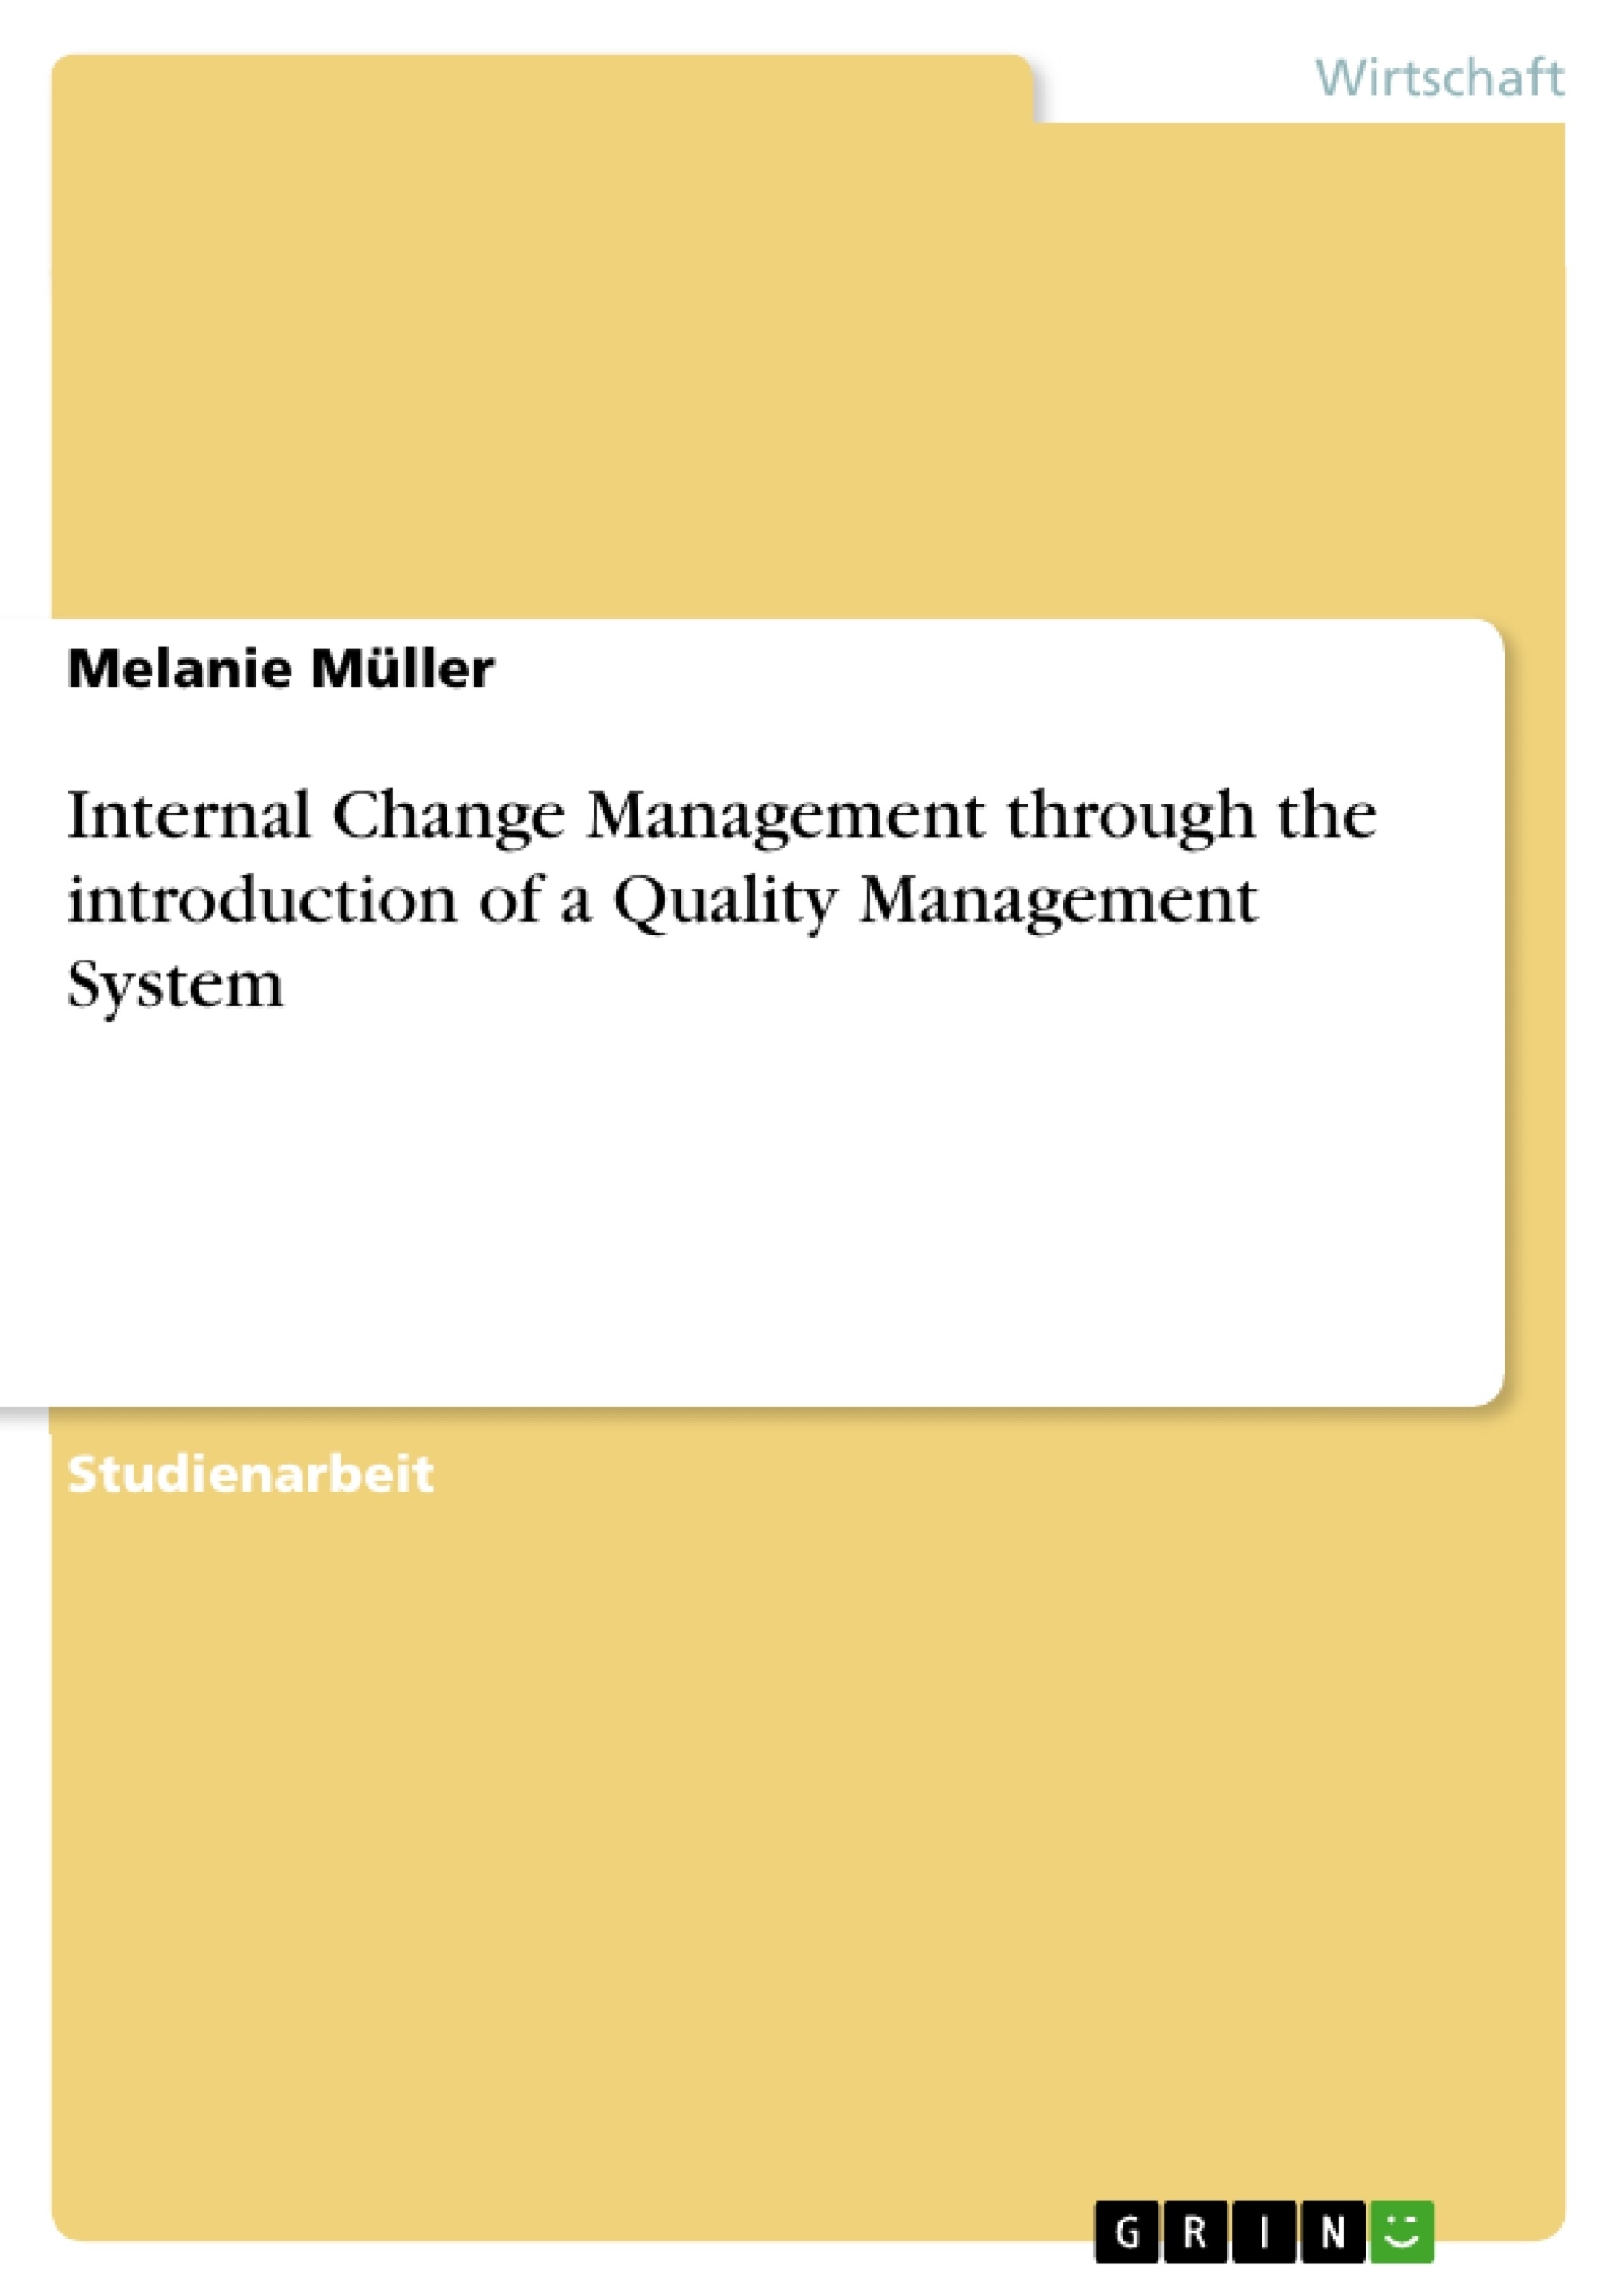 Título: Internal Change Management through the introduction of a Quality Management System